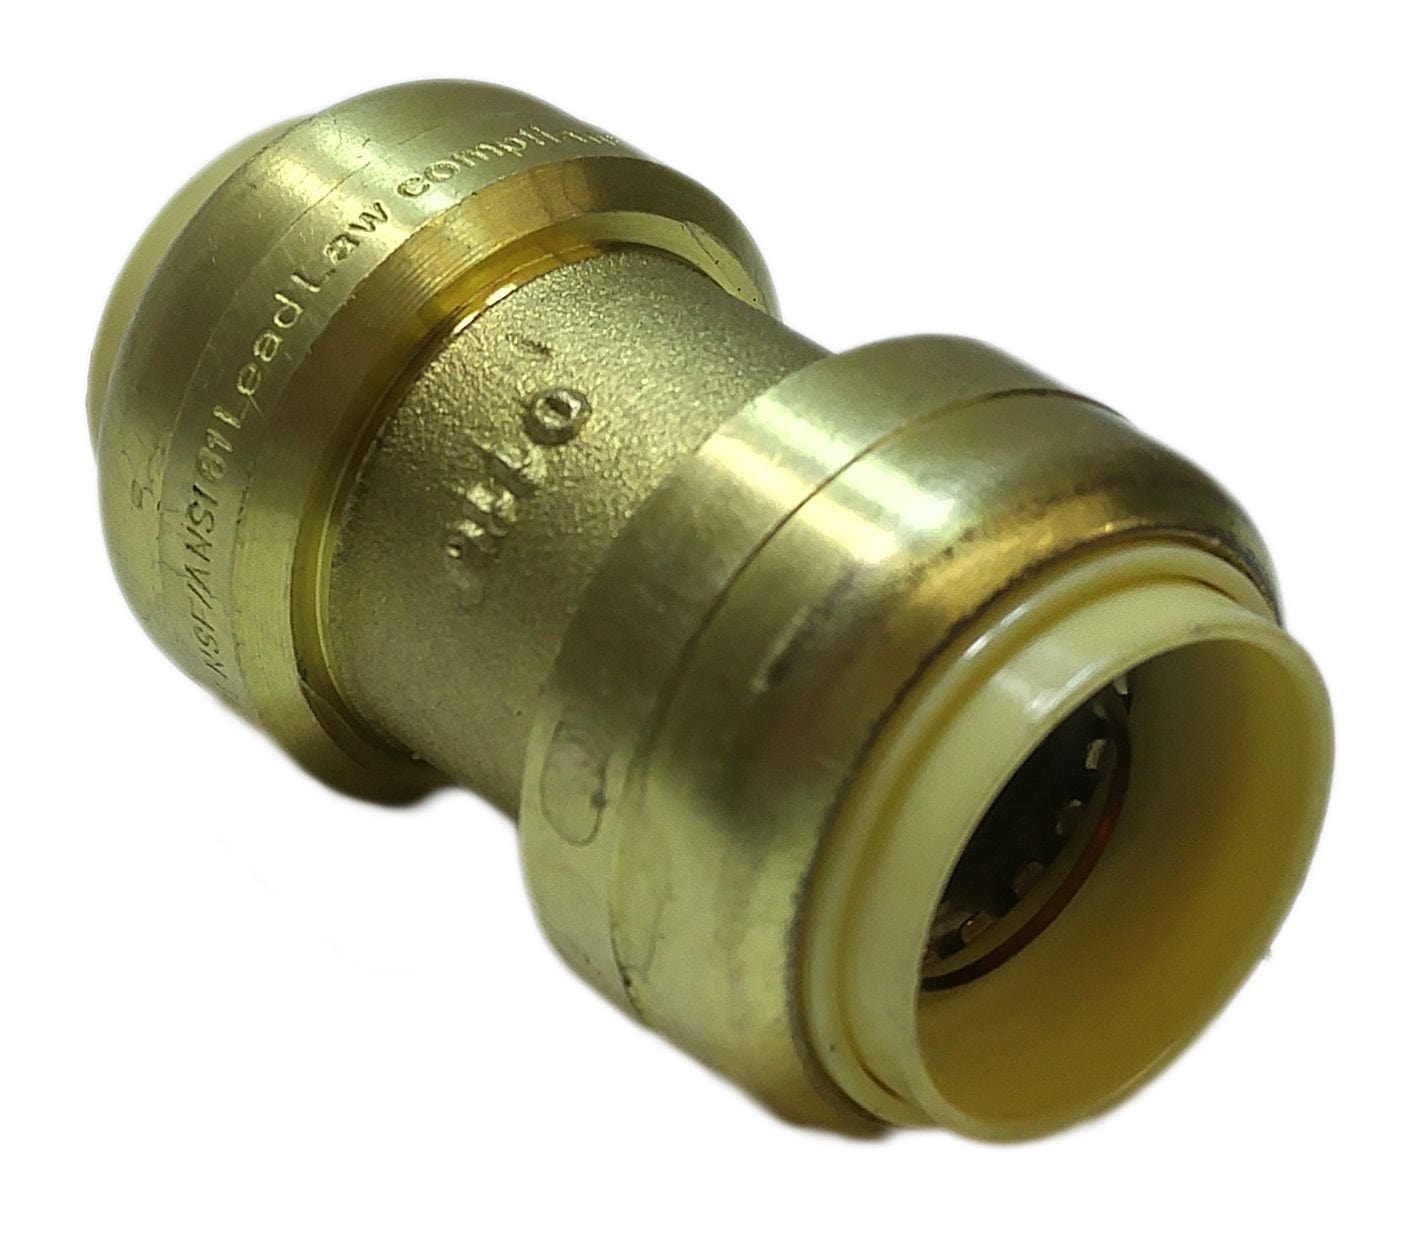 LF Quick Connect Push Fitting Coupling 1-1/2"